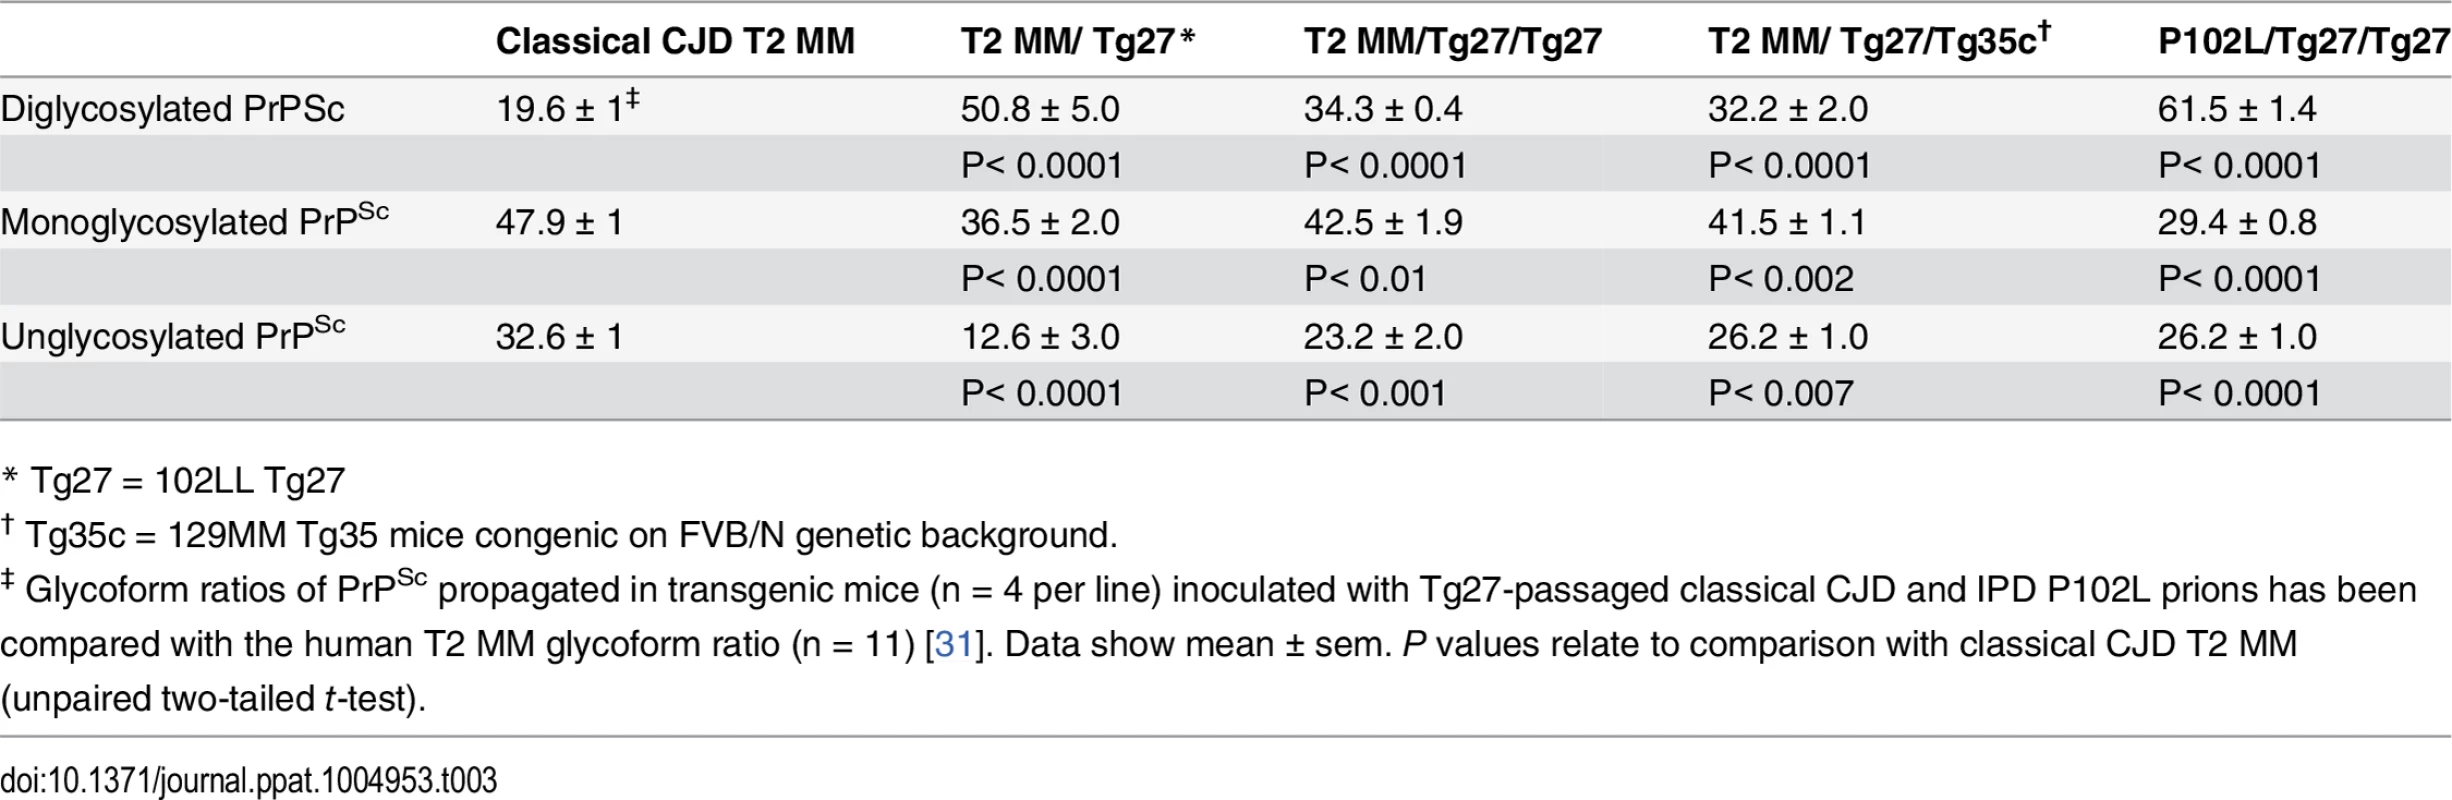 Glycoform analysis of Tg27-passaged classical CJD (CJD-102L) and IPD P102L (GSS-102L) prions transmitted to transgenic 102LL Tg27 and 129MM Tg35c mice.